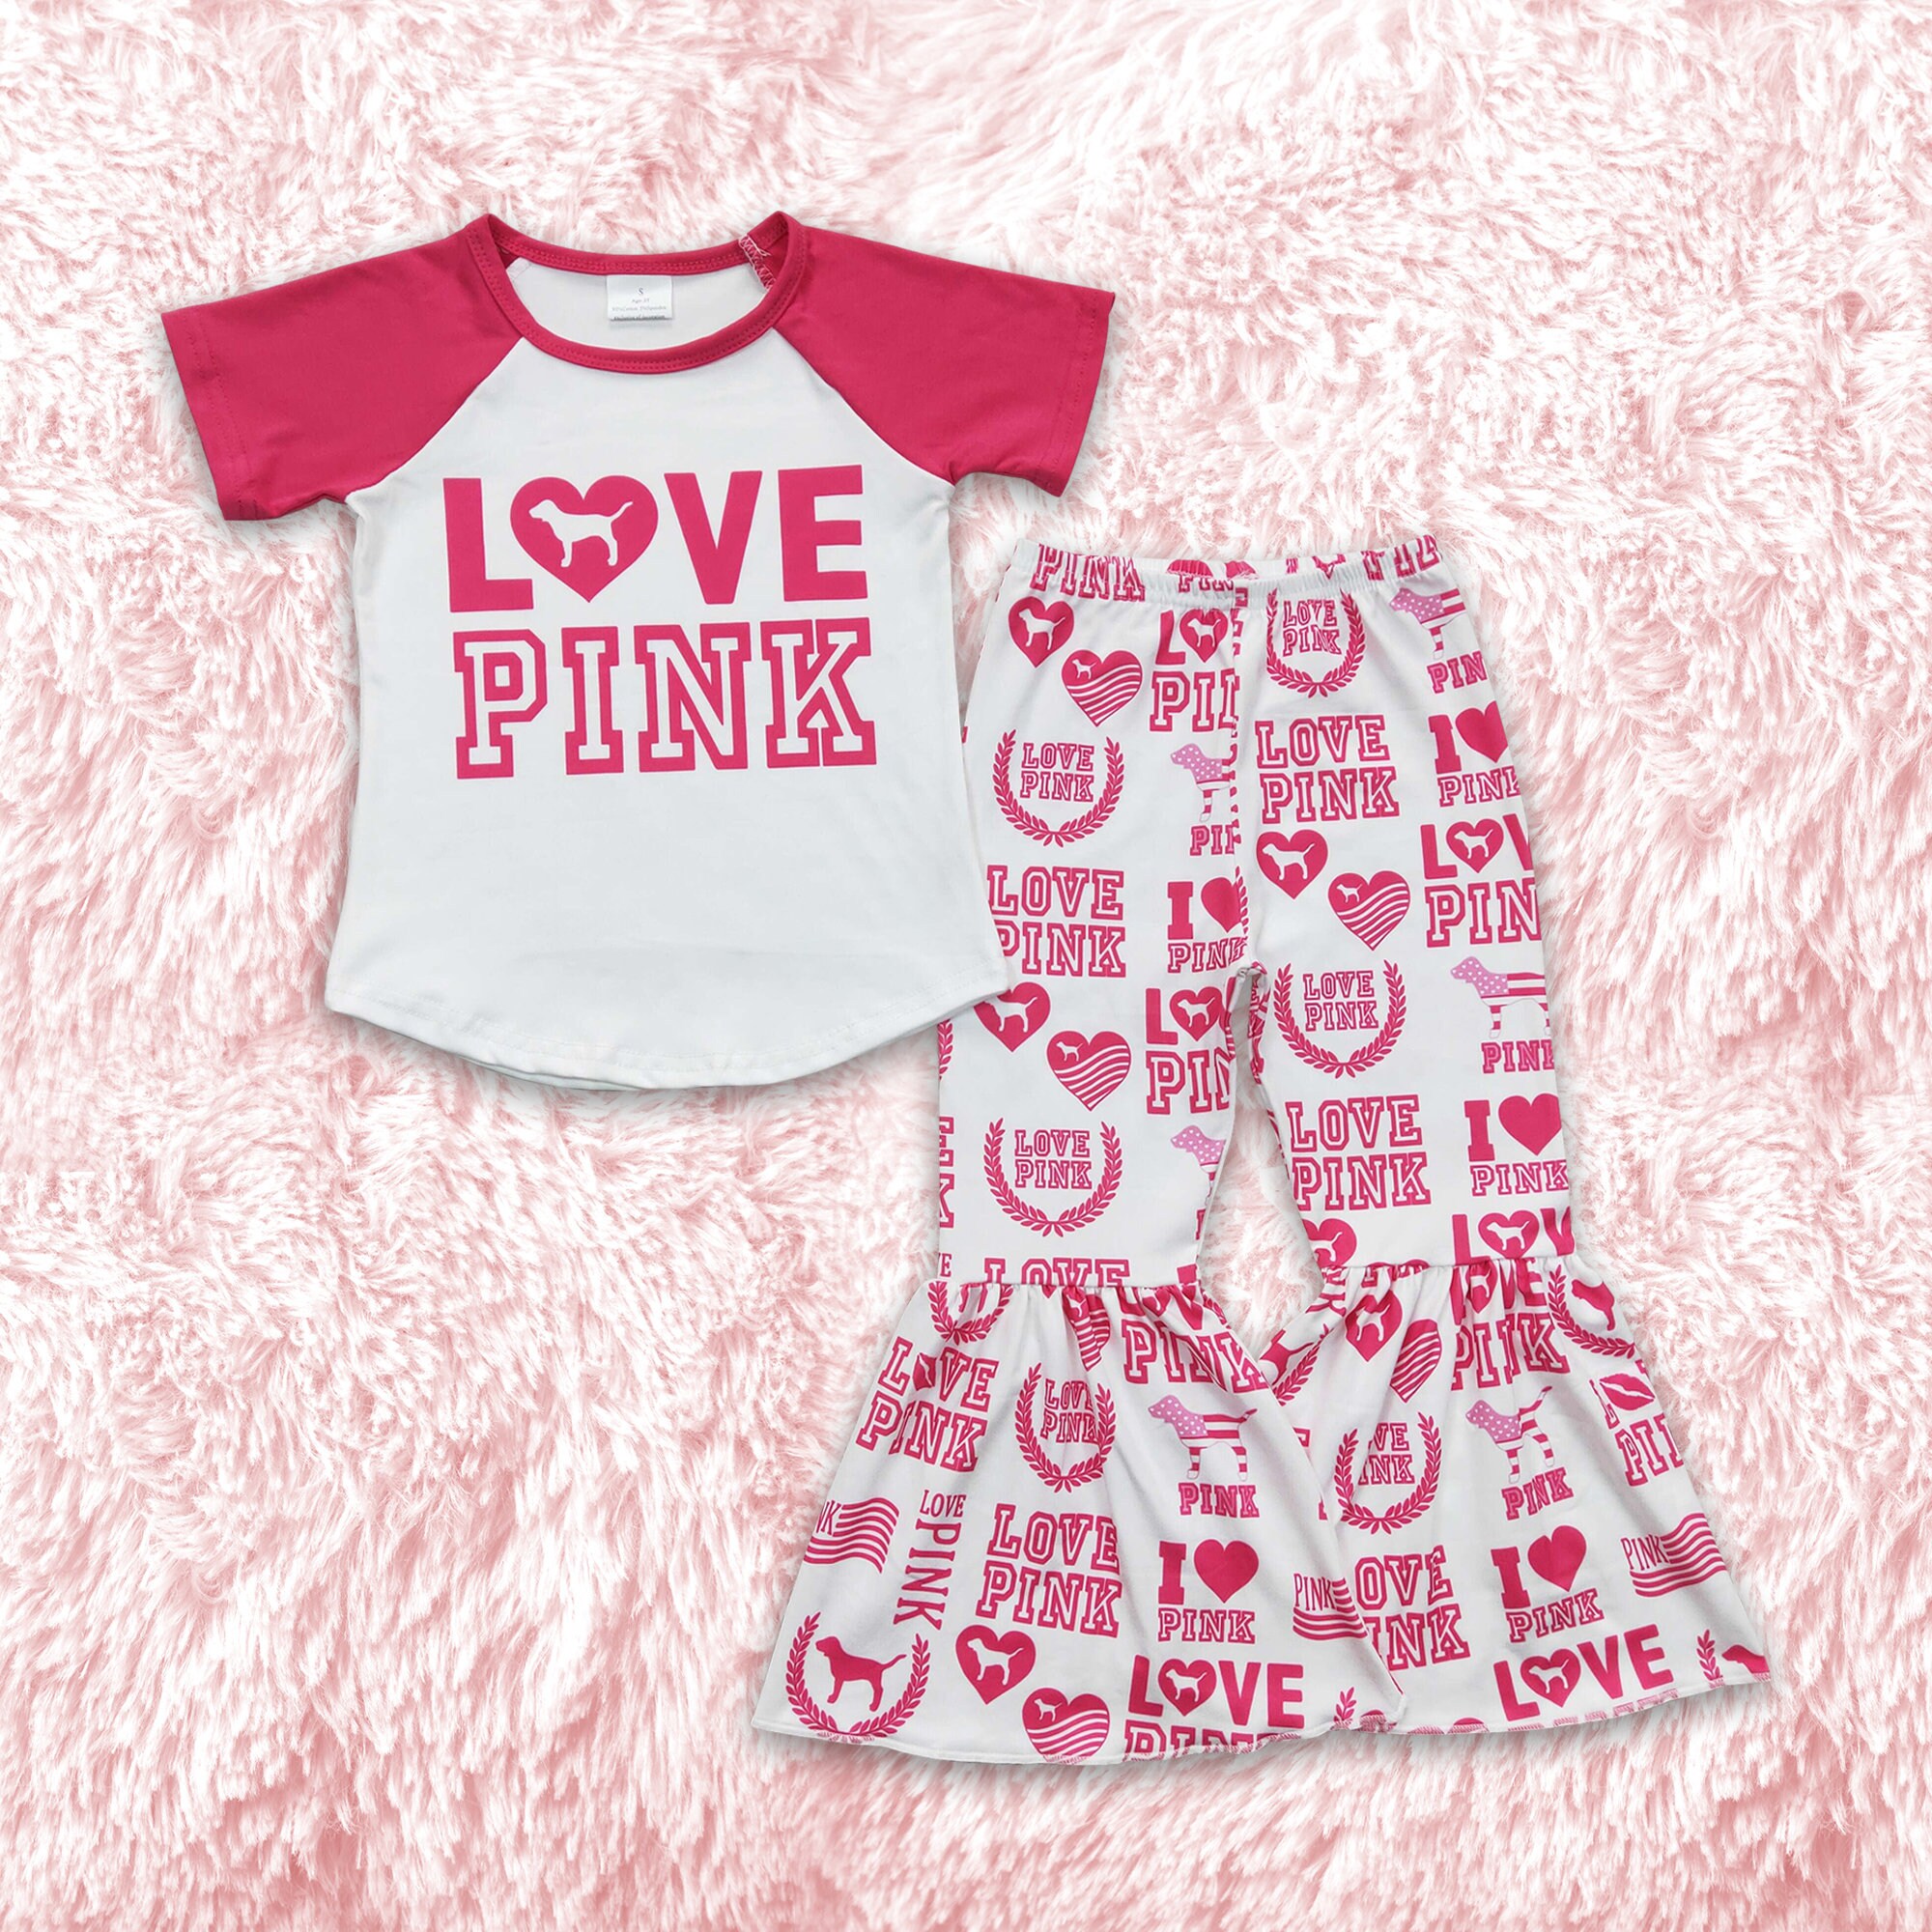 Baby Boy Girl Clothes OutfitsCottonPrinted TopCasual2PC Set 4t Designer  Clothes (Pink, 2-3 Years)